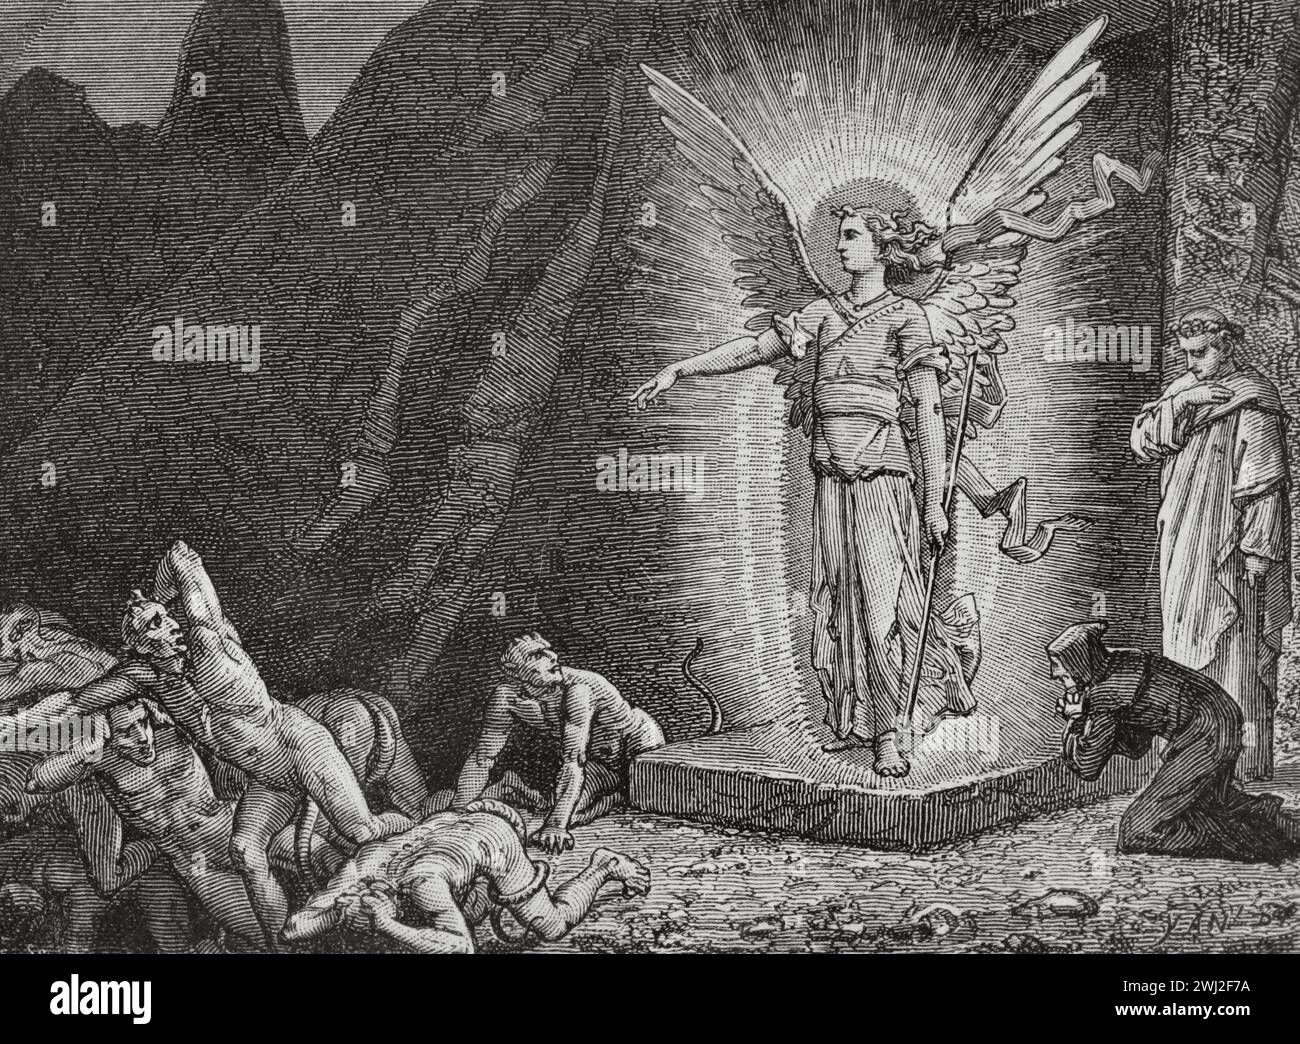 The Divine Comedy (1307-1321). Italian narrative poem by the Italian poet Dante Alighieri (1265-1321). Inferno (Hell). 'Oh demons cast out of heaven!...' Illustration by Yann Dargent (1824-1899). Engraving. Published in Paris, 1888. Stock Photo